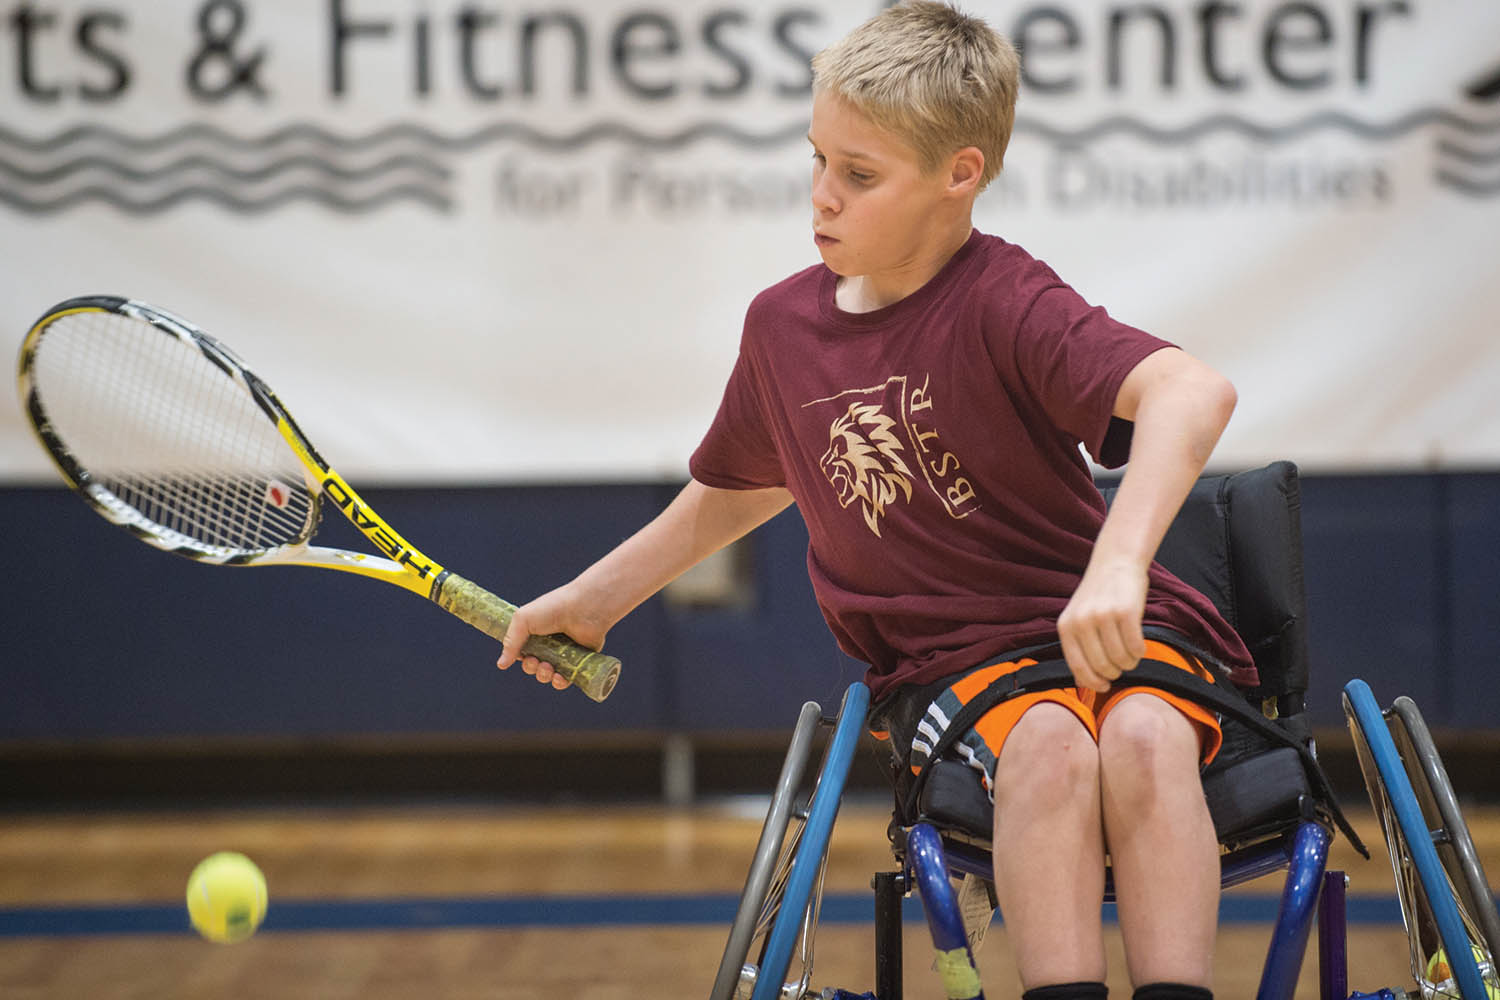 Ability360 offers sports clinics